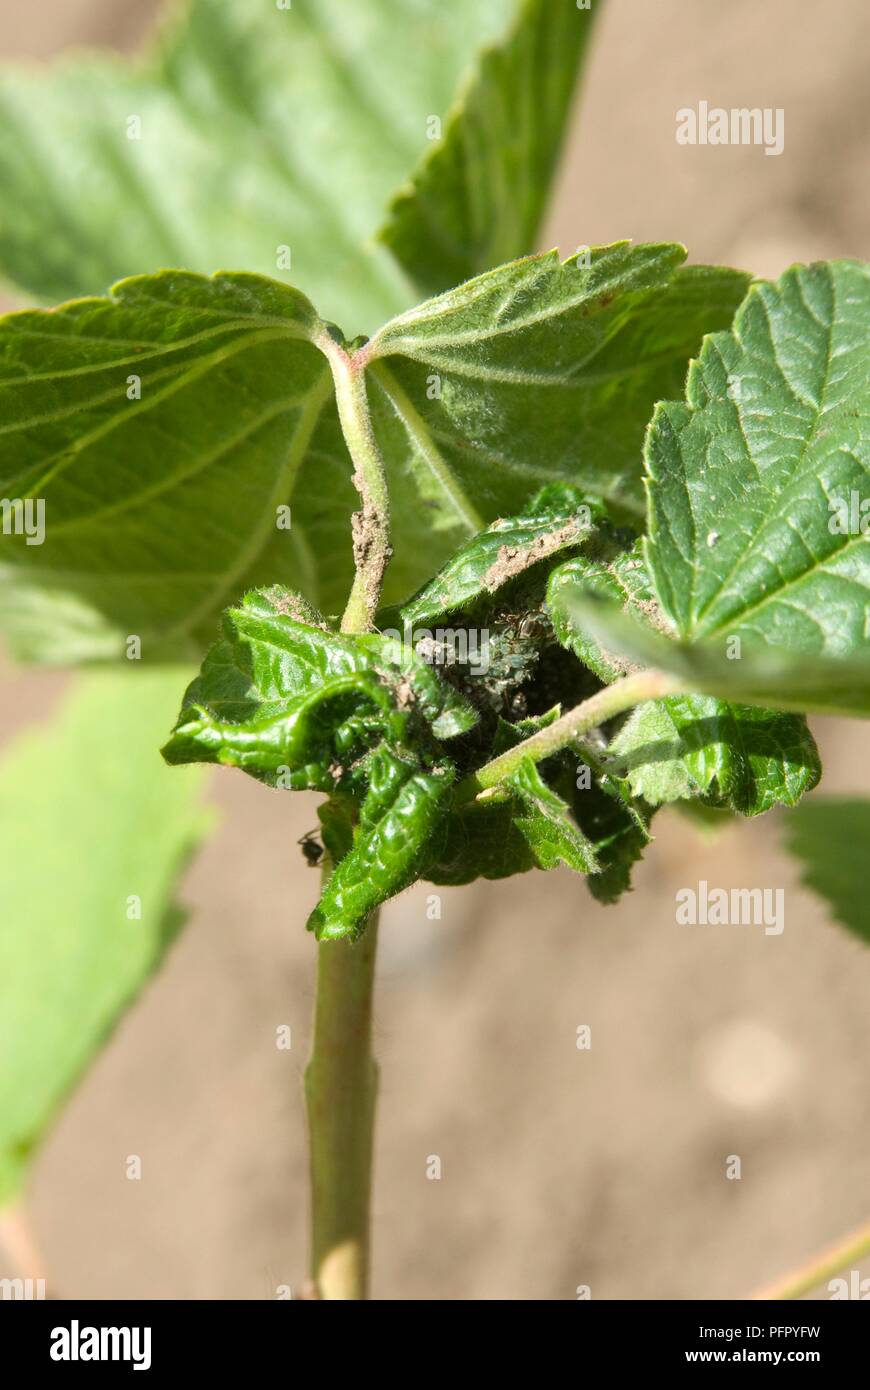 Currant blackfly, close-up on damaged leaves Stock Photo